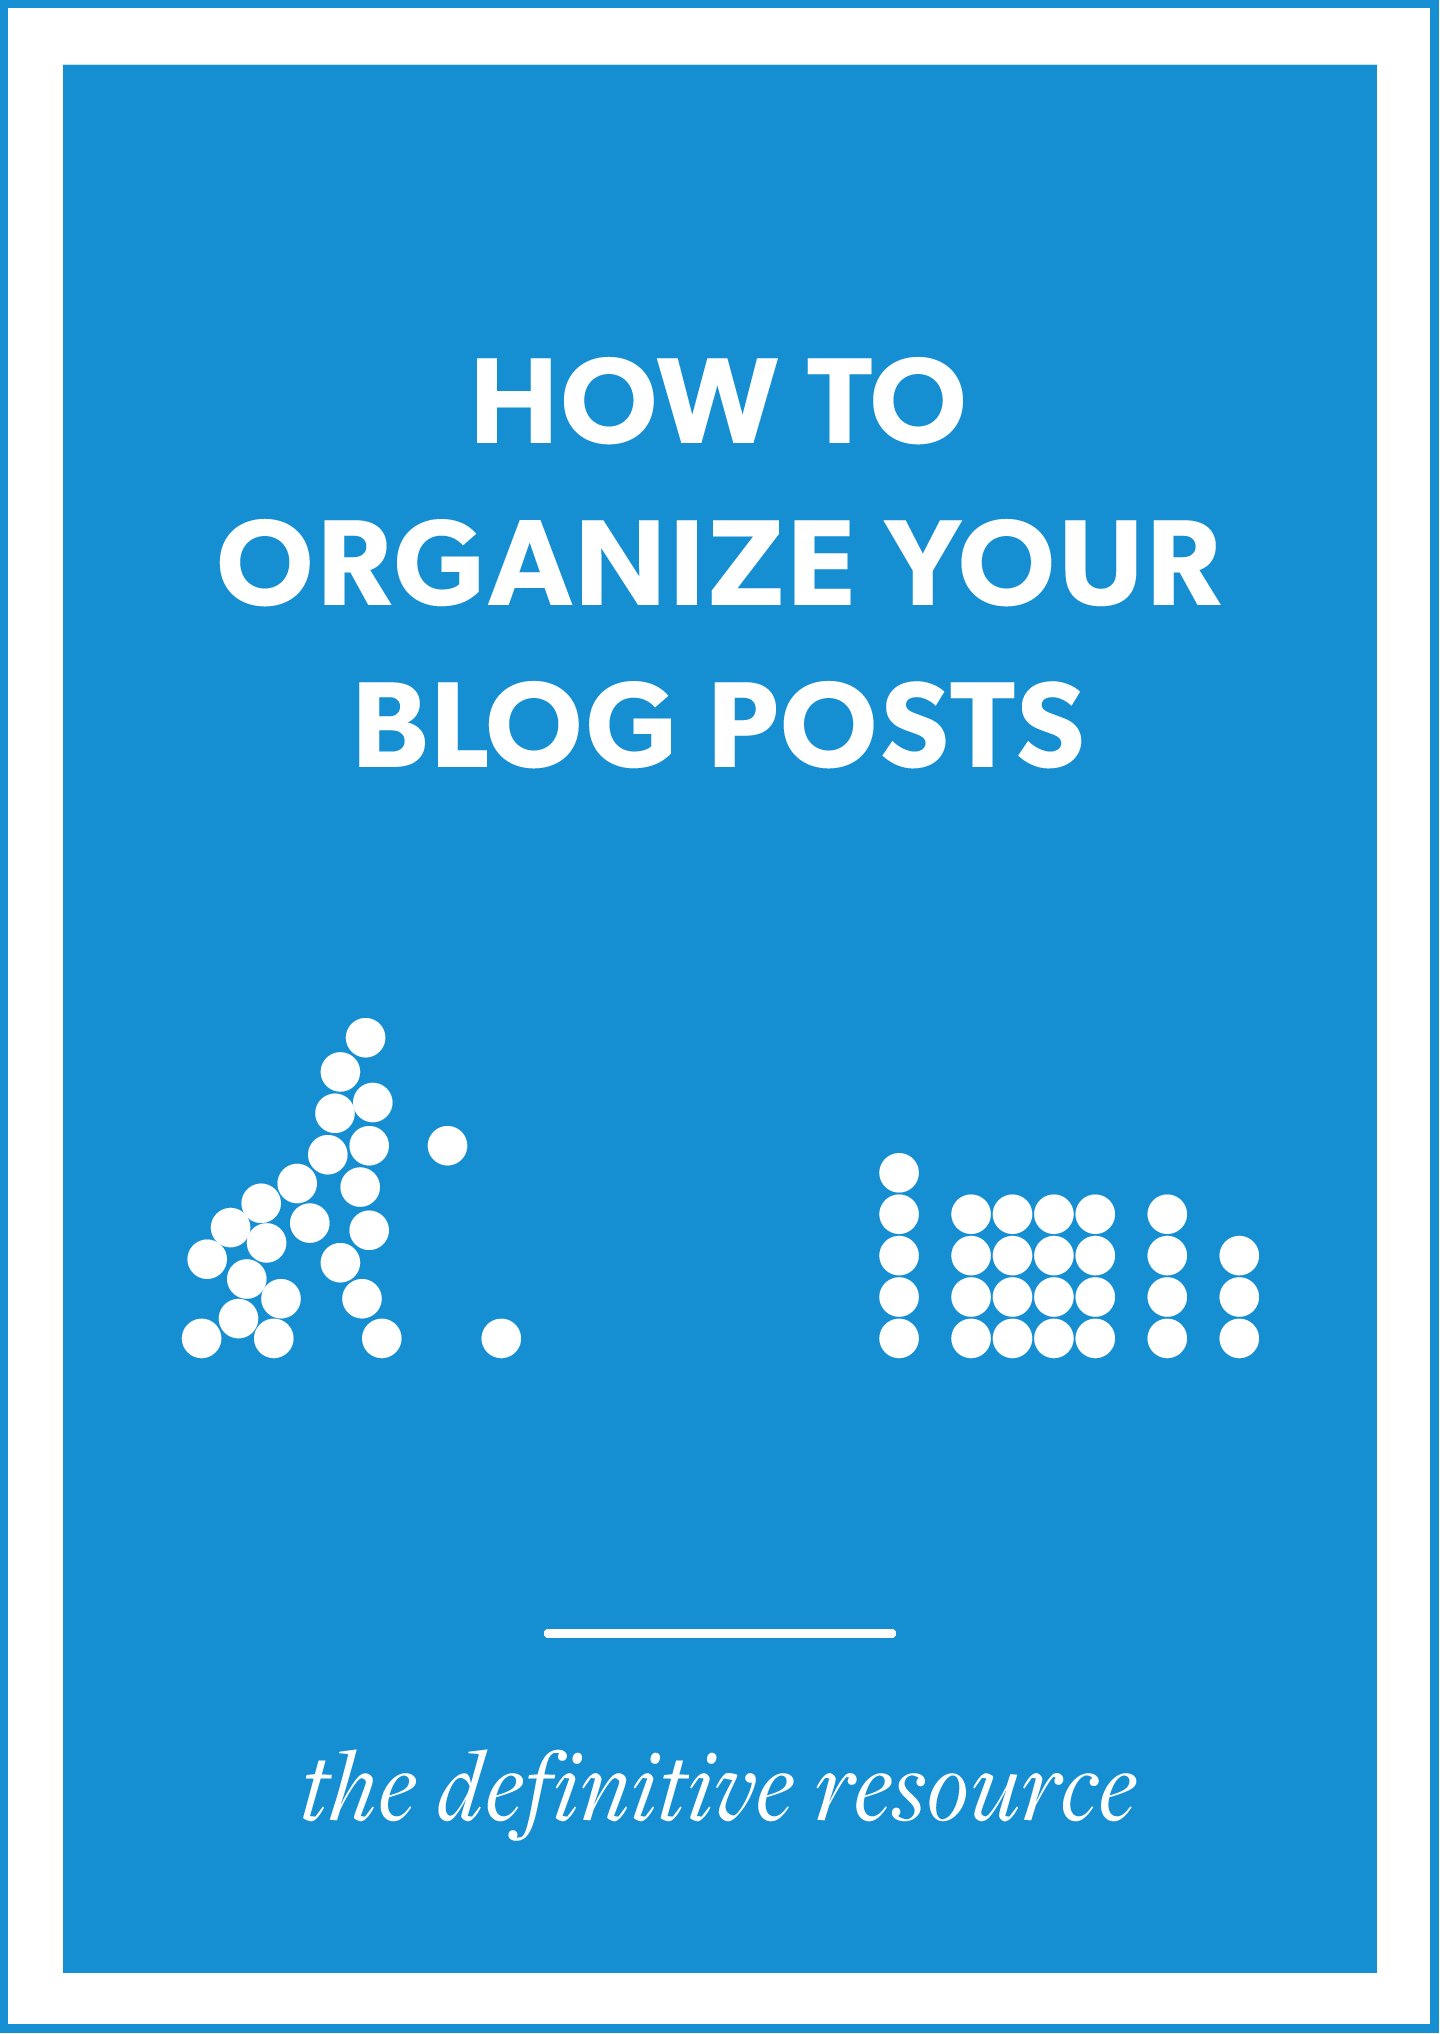 How to organize your blog posts: the definitive guide to categories, tags, custom taxonomies. Pin this for later!